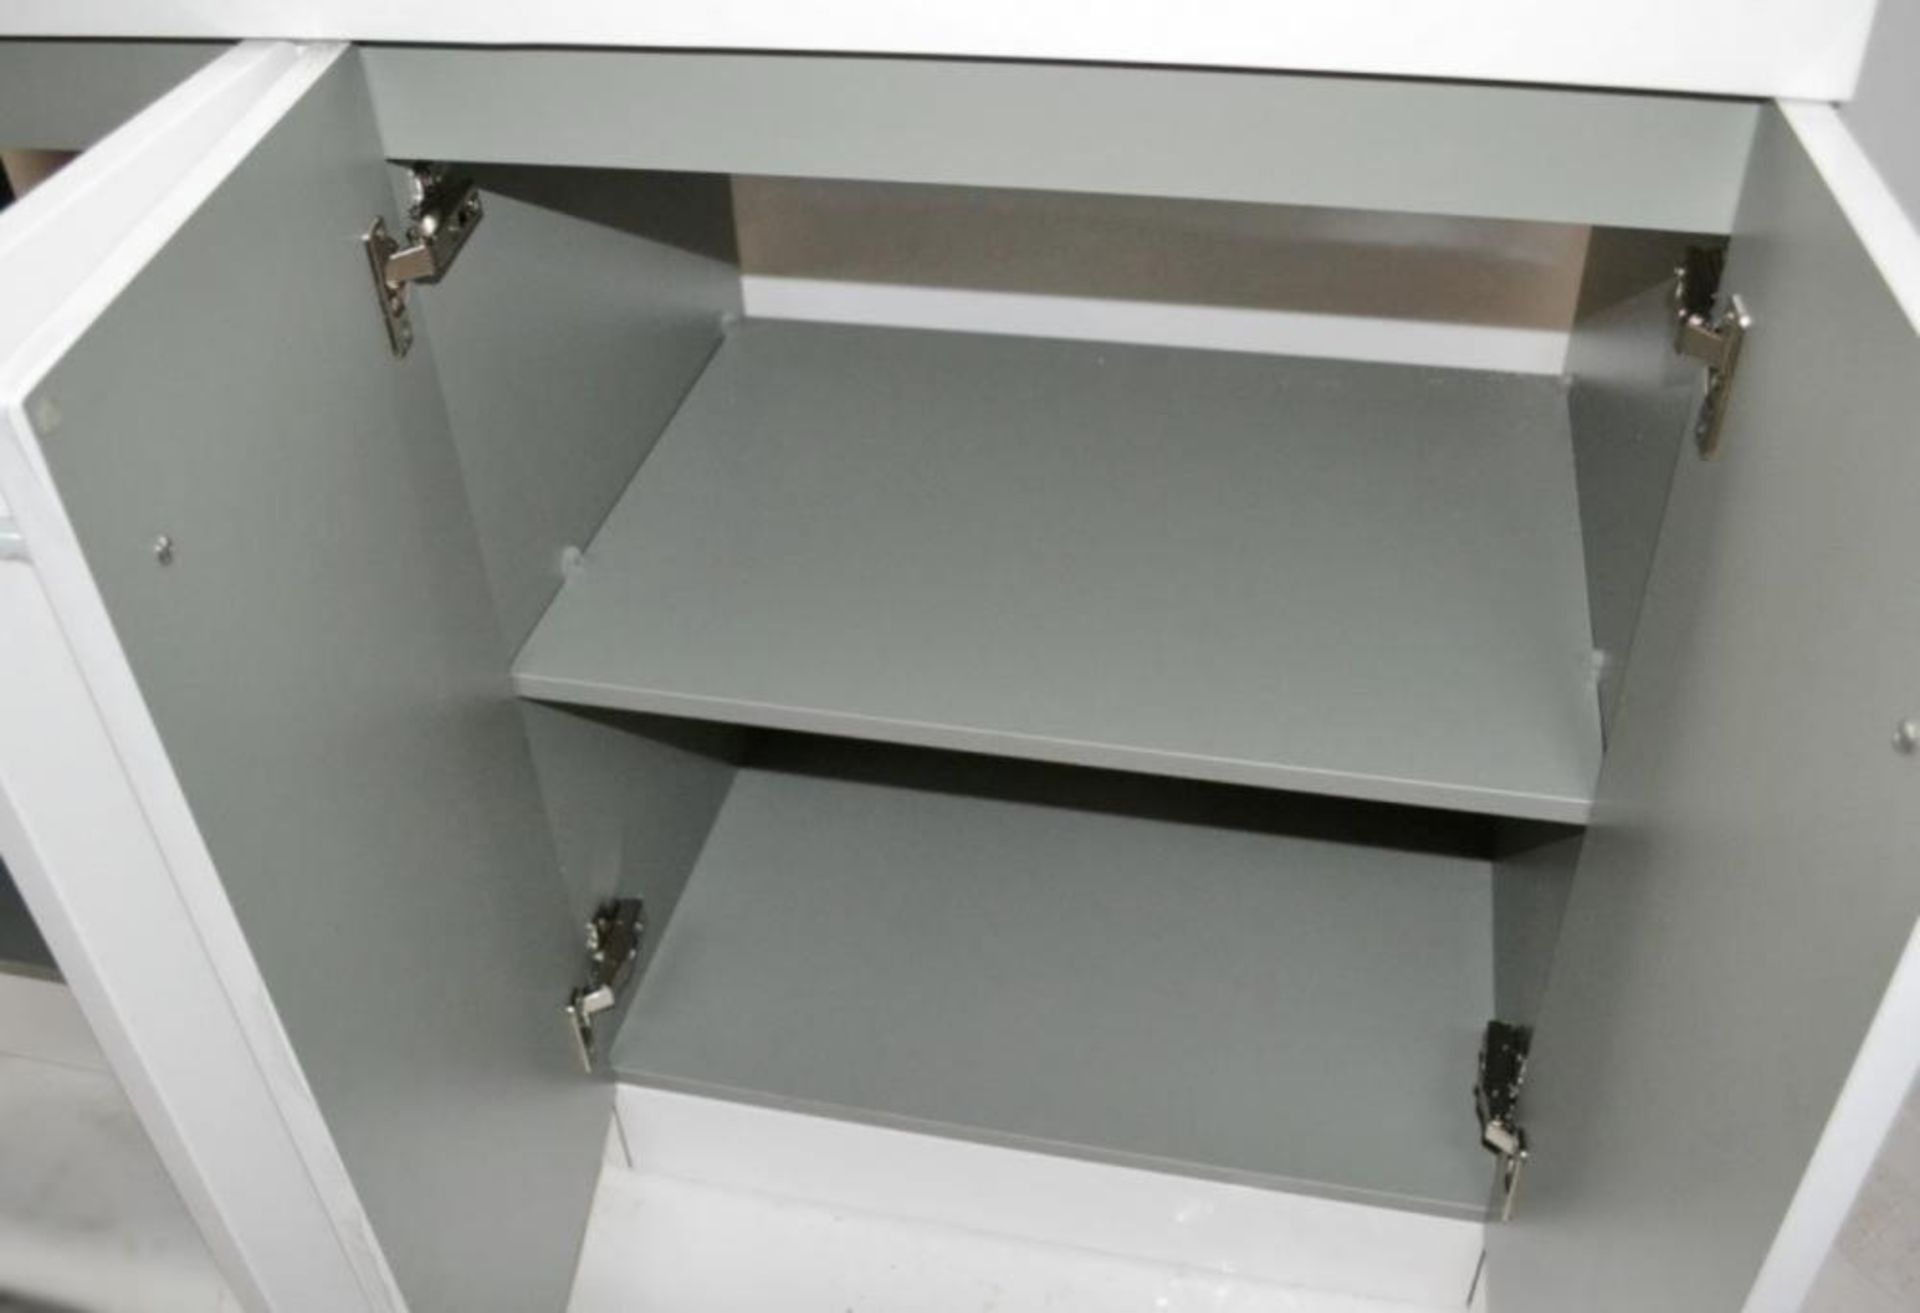 1 x His & Hers Double Bathroom Vanity Unit - 1200mm Wide - Features a High Gloss White Finish and So - Image 3 of 7